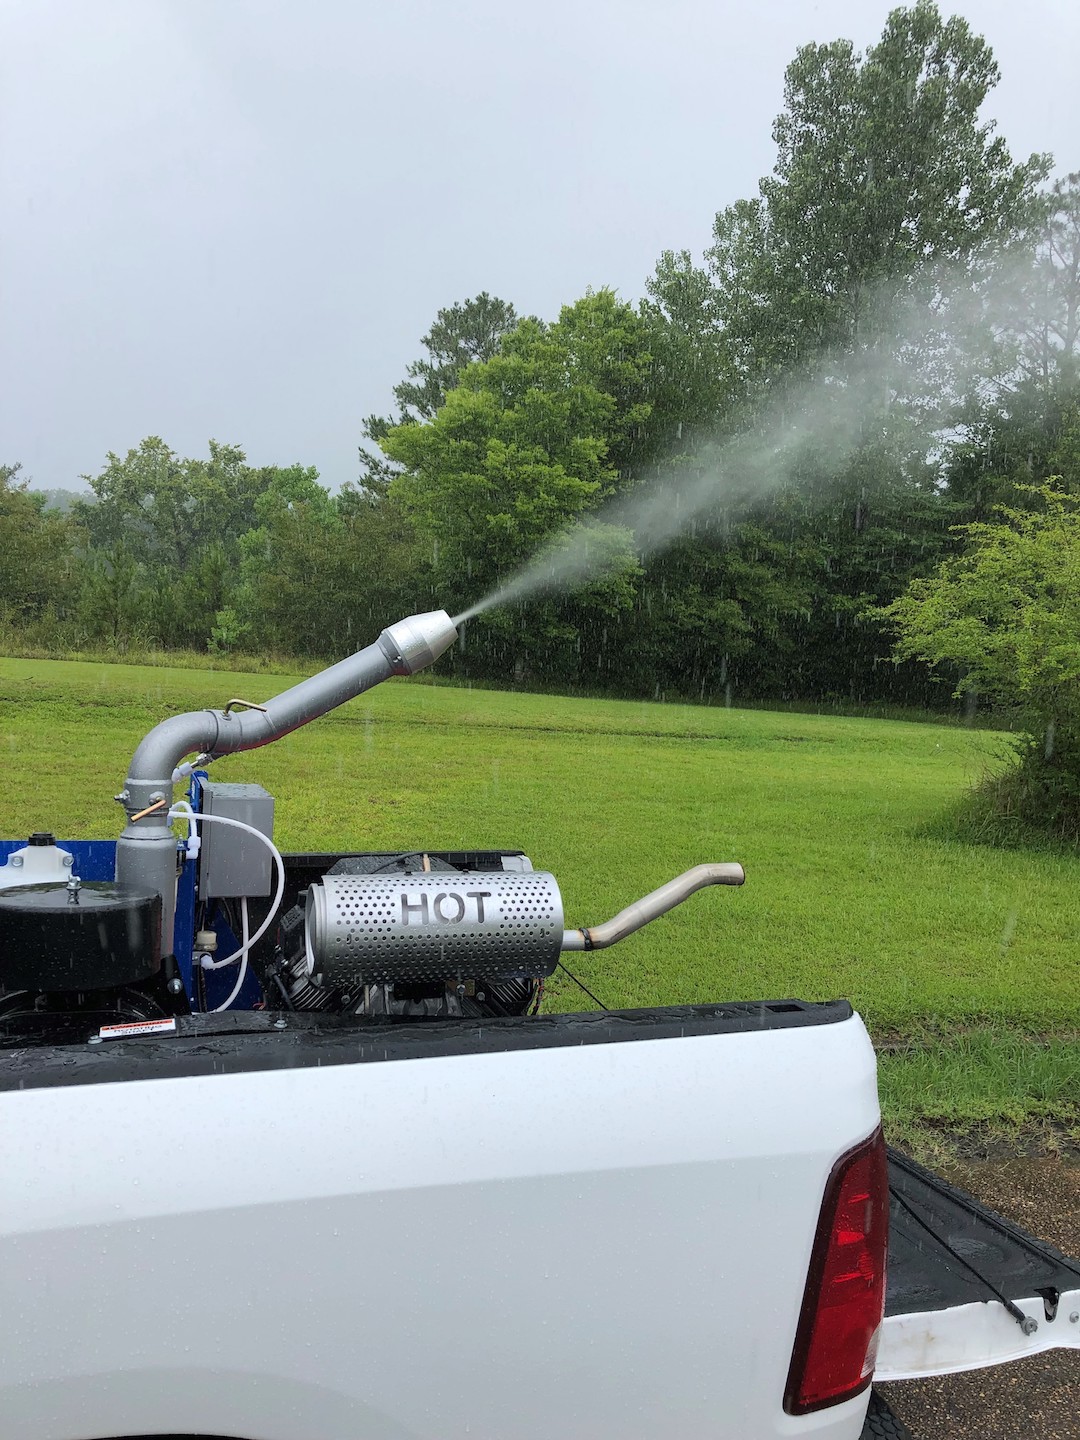 A machine in the back of a truck spraying a mist.